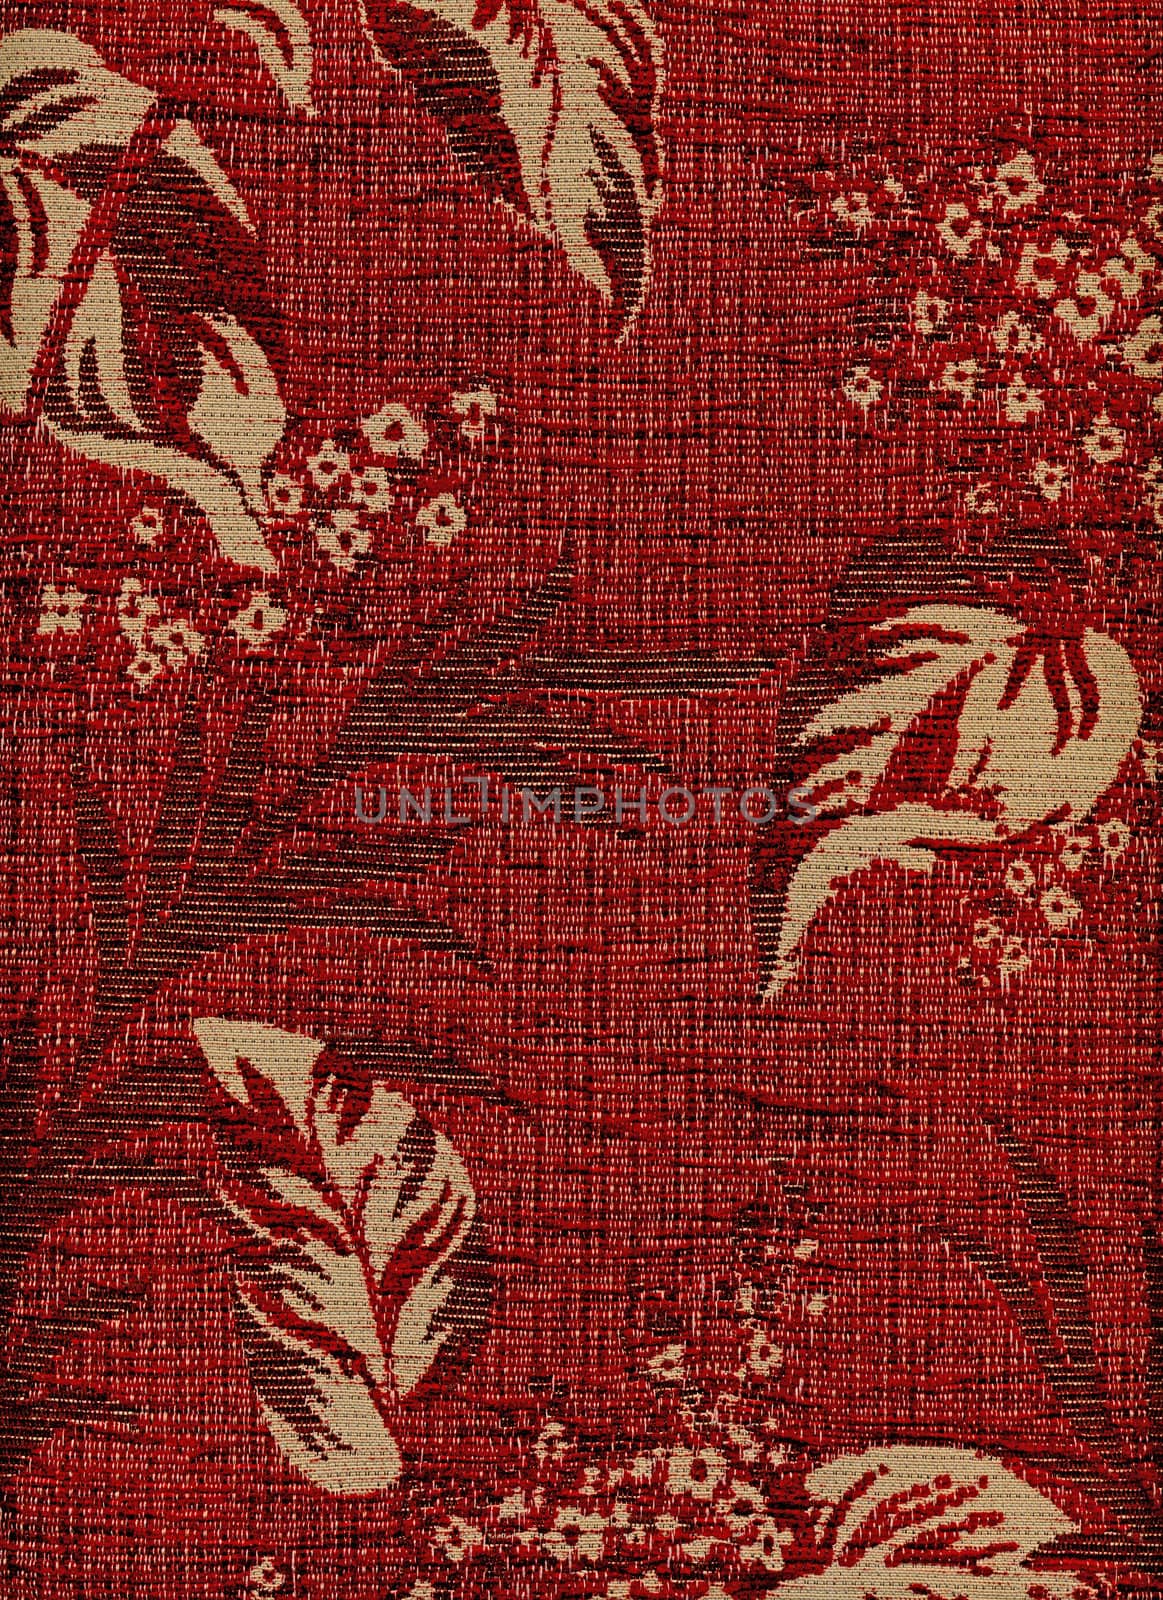 Abstract red background - very detailed and real...